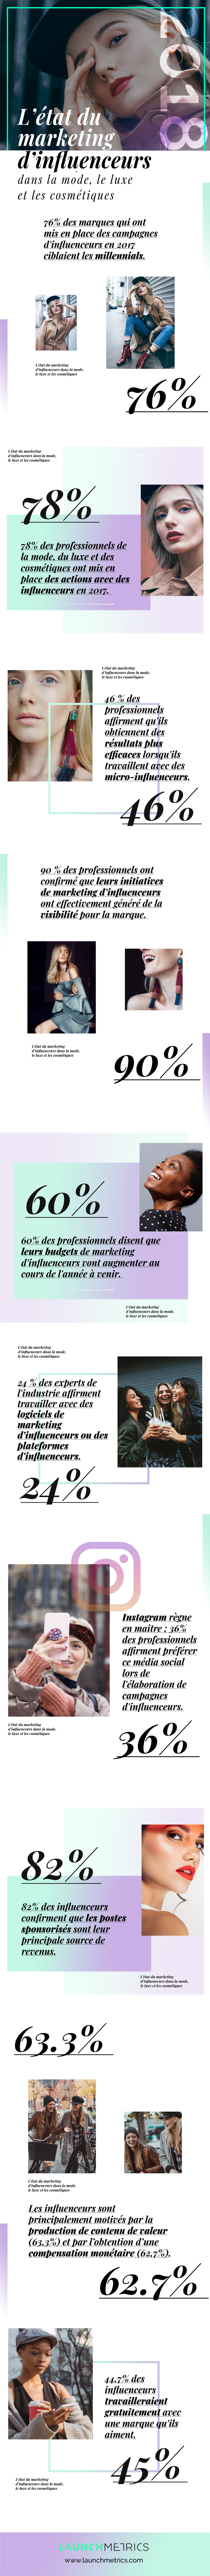 state-of-influencer-marketing_infographic-FR